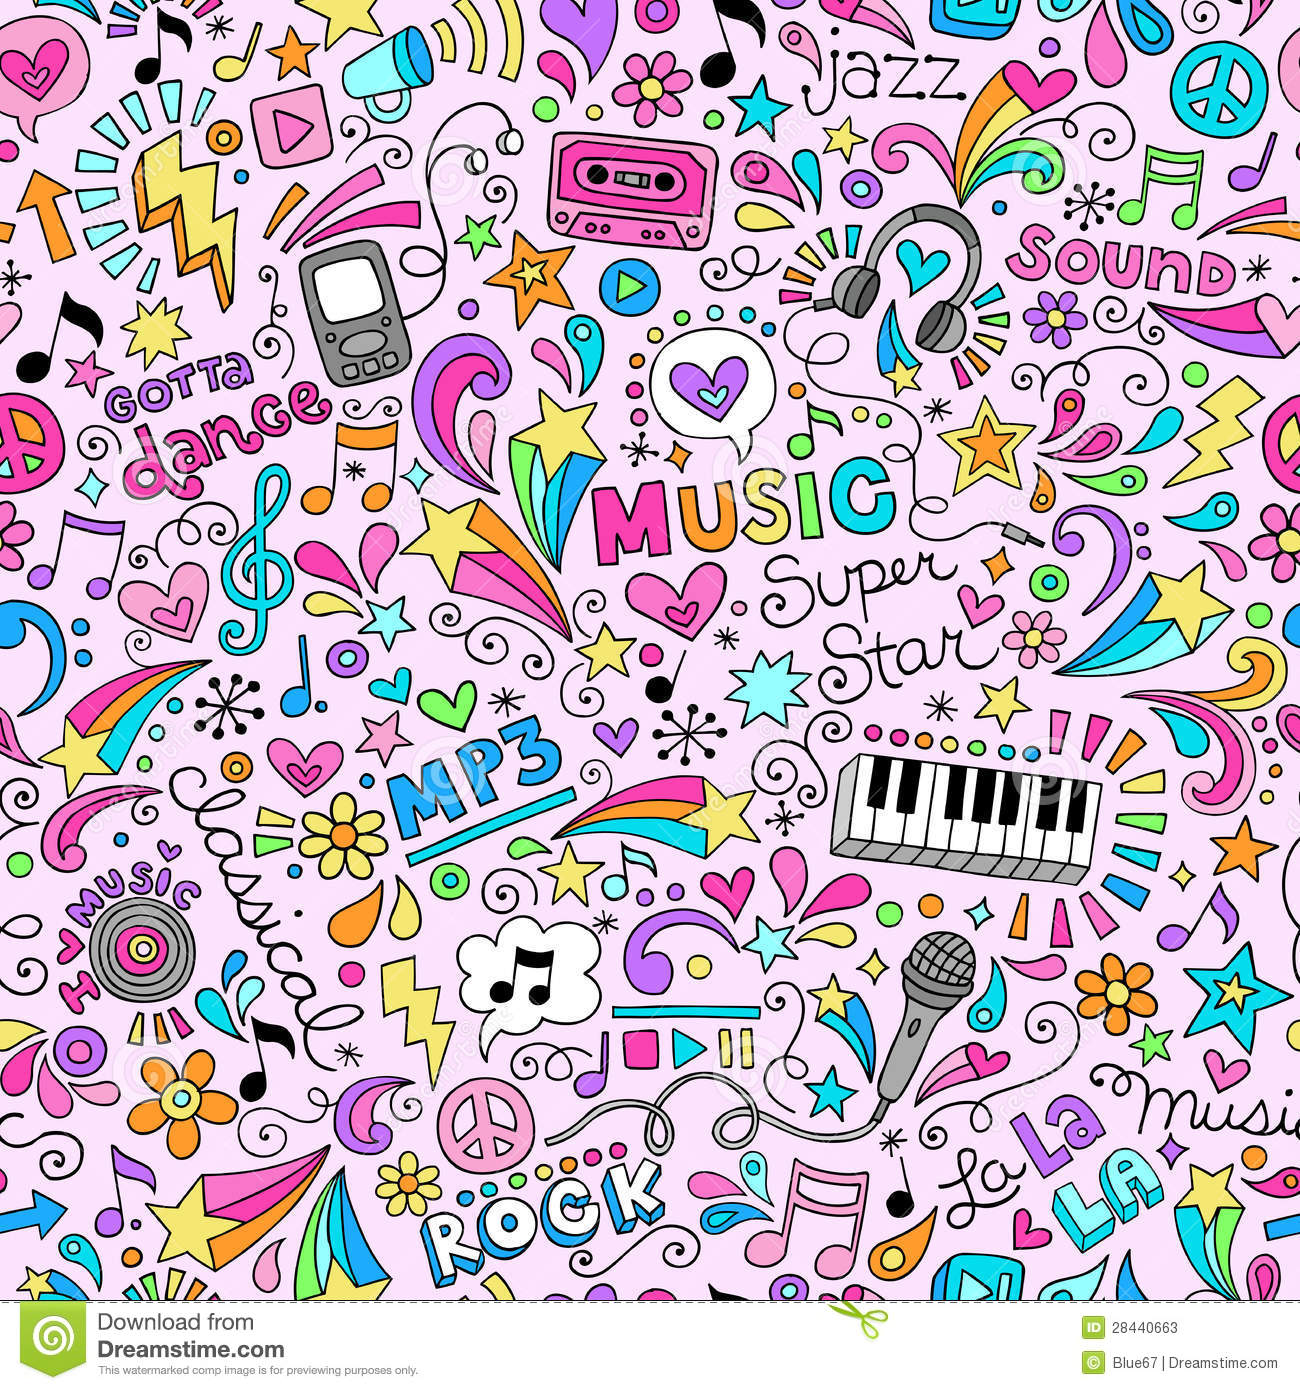 Music Doodles Groovy Seamless Pattern Background Stock Photos   Image